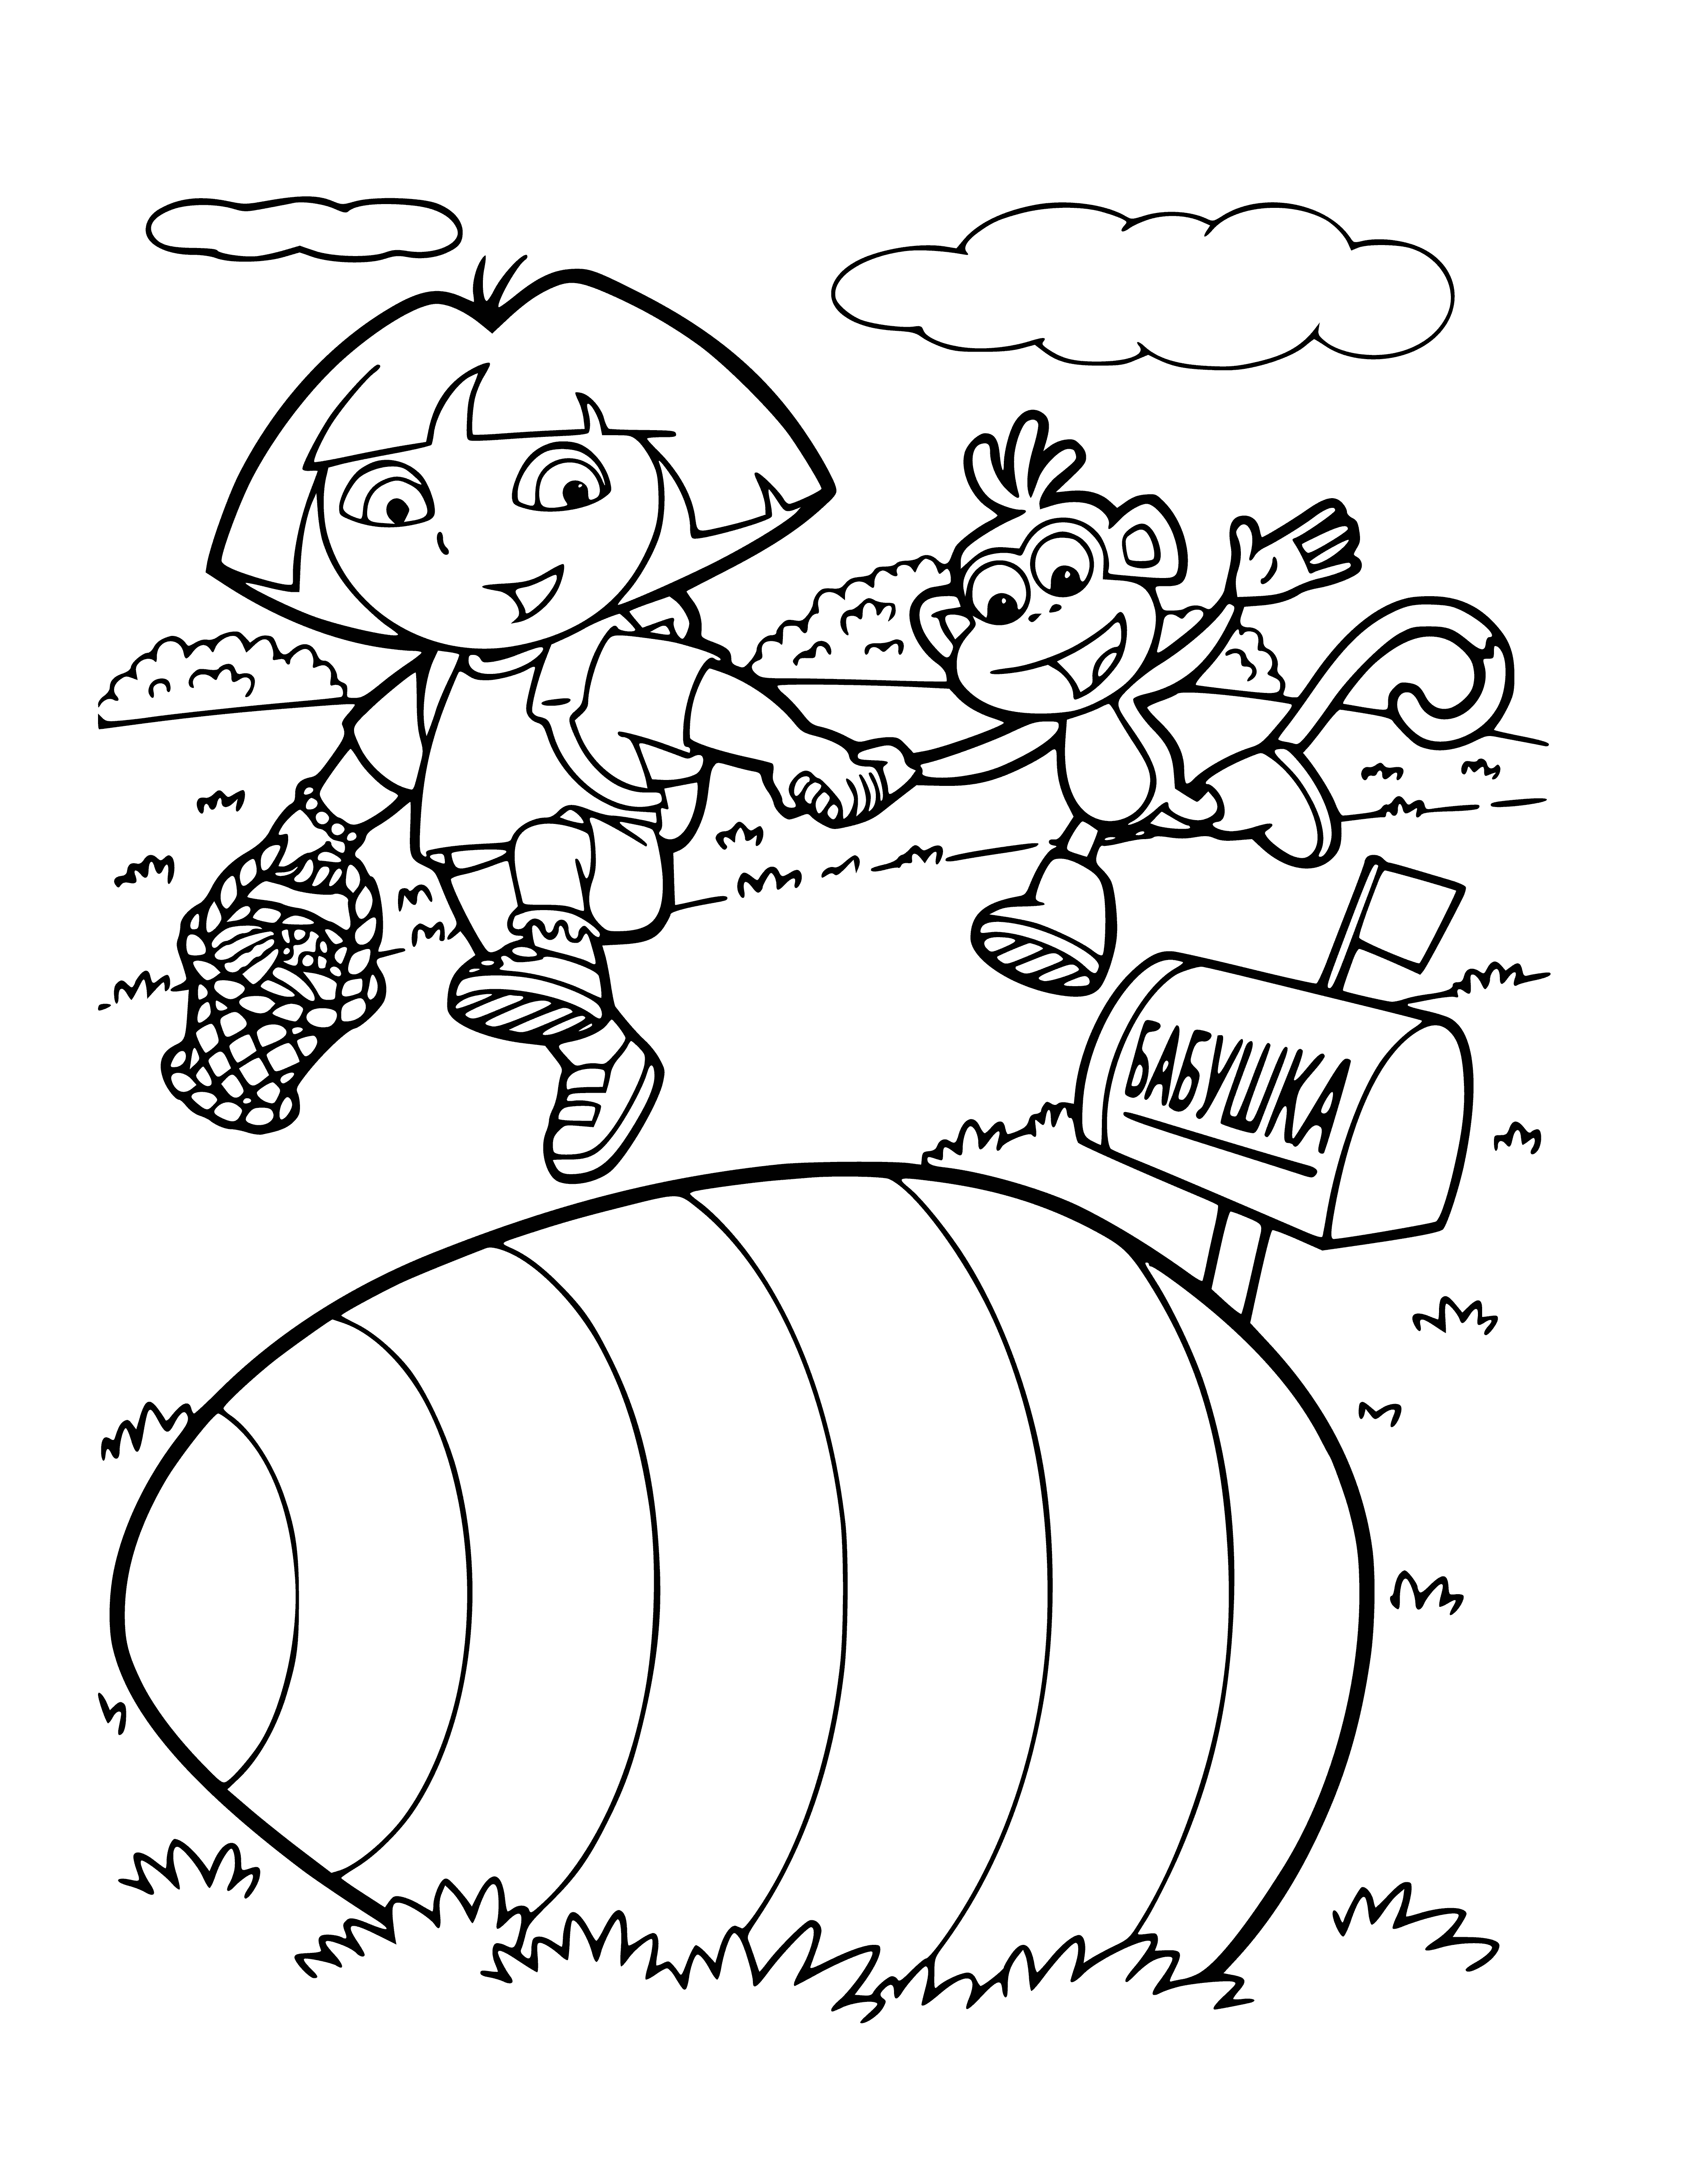 coloring page: Girl with Easter basket in sunny field, presumably Dora, stands surrounded by trees, grass, and flowers on coloring page. #Easter #ColoringPage